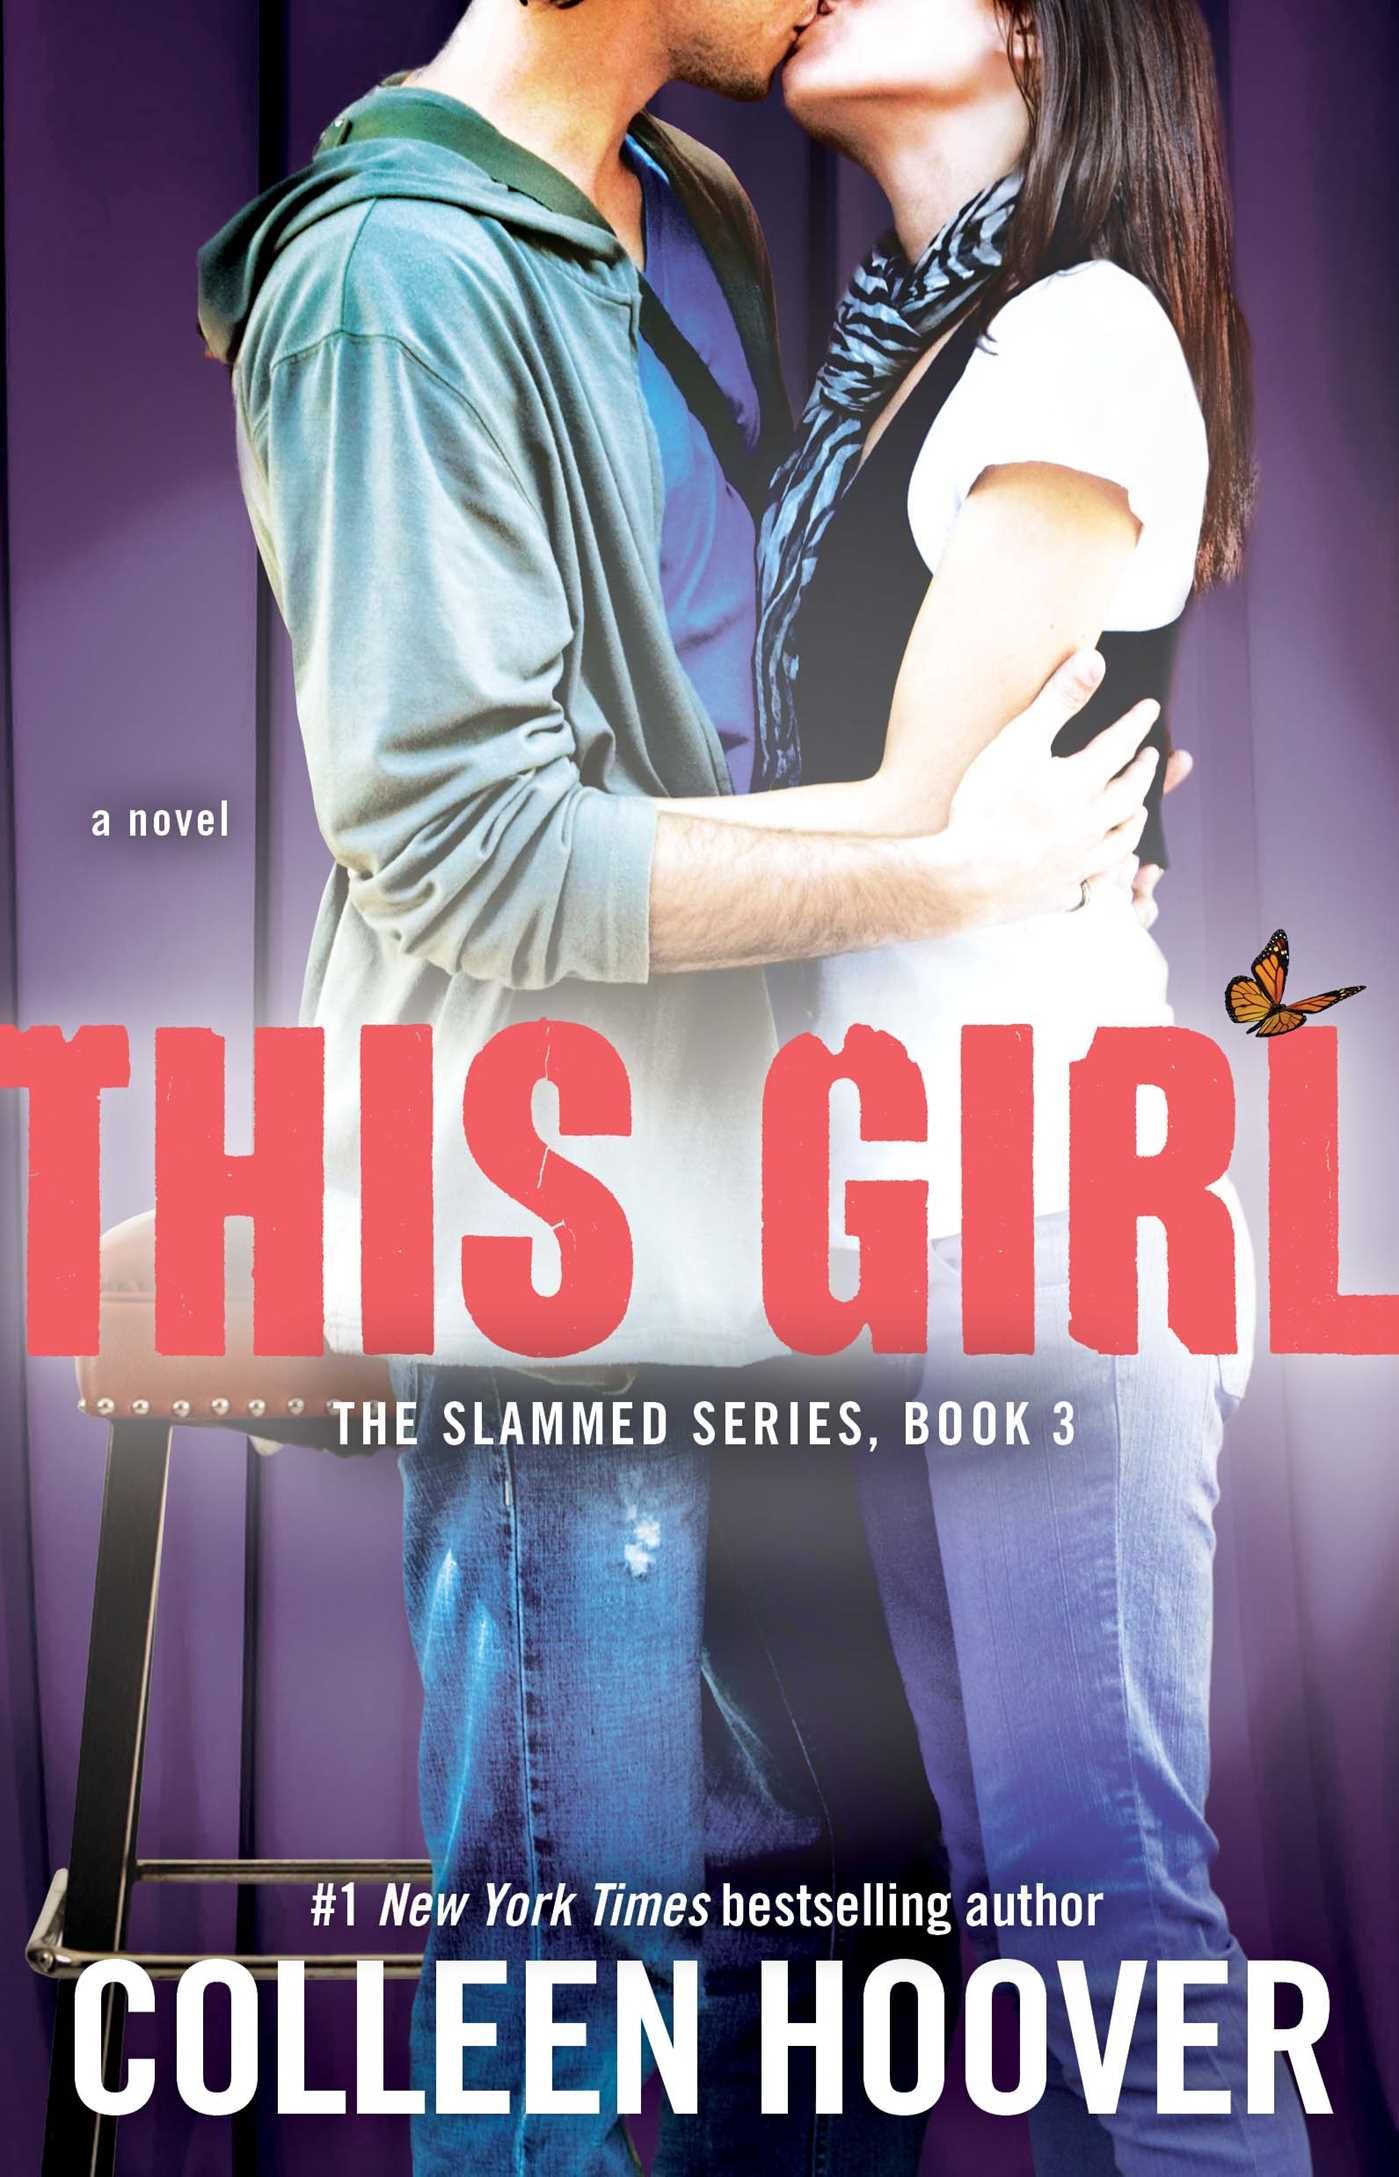 Colleen Hoover: An Epidemic in Popular Romance Books - Spyglass